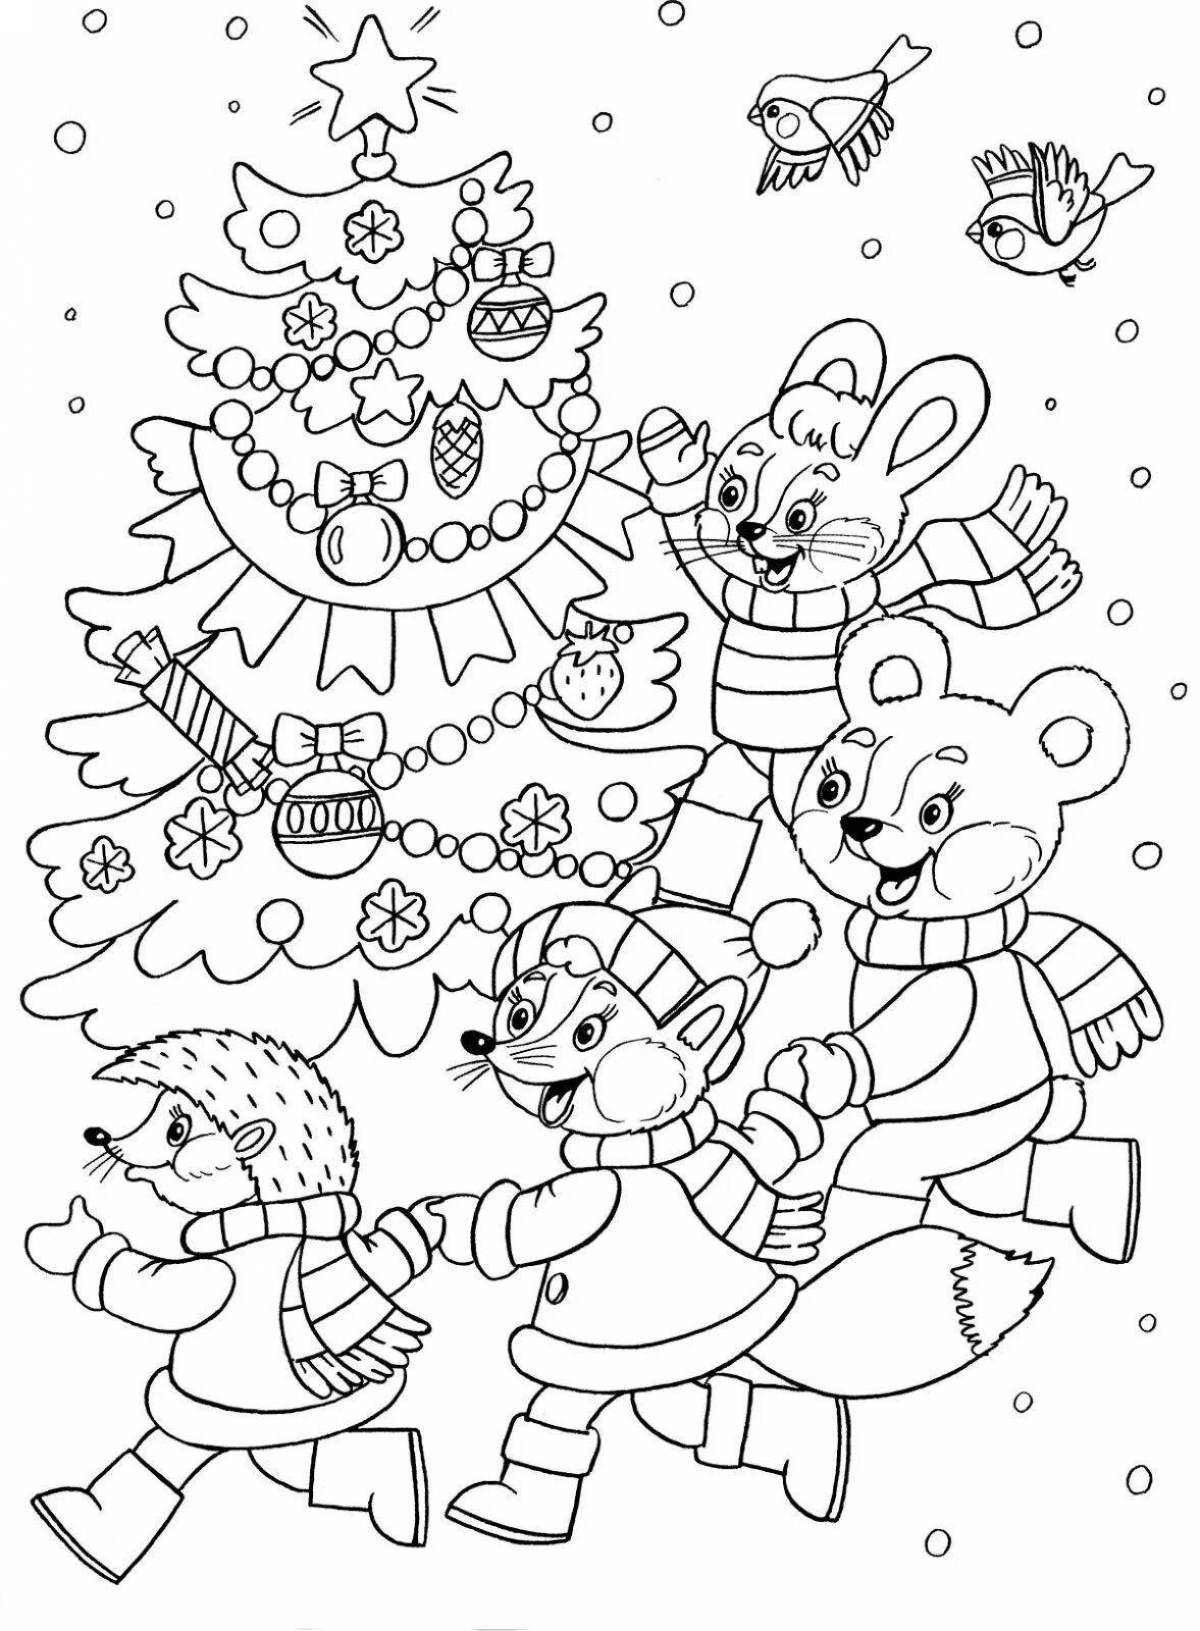 Whimsical children's Christmas coloring book